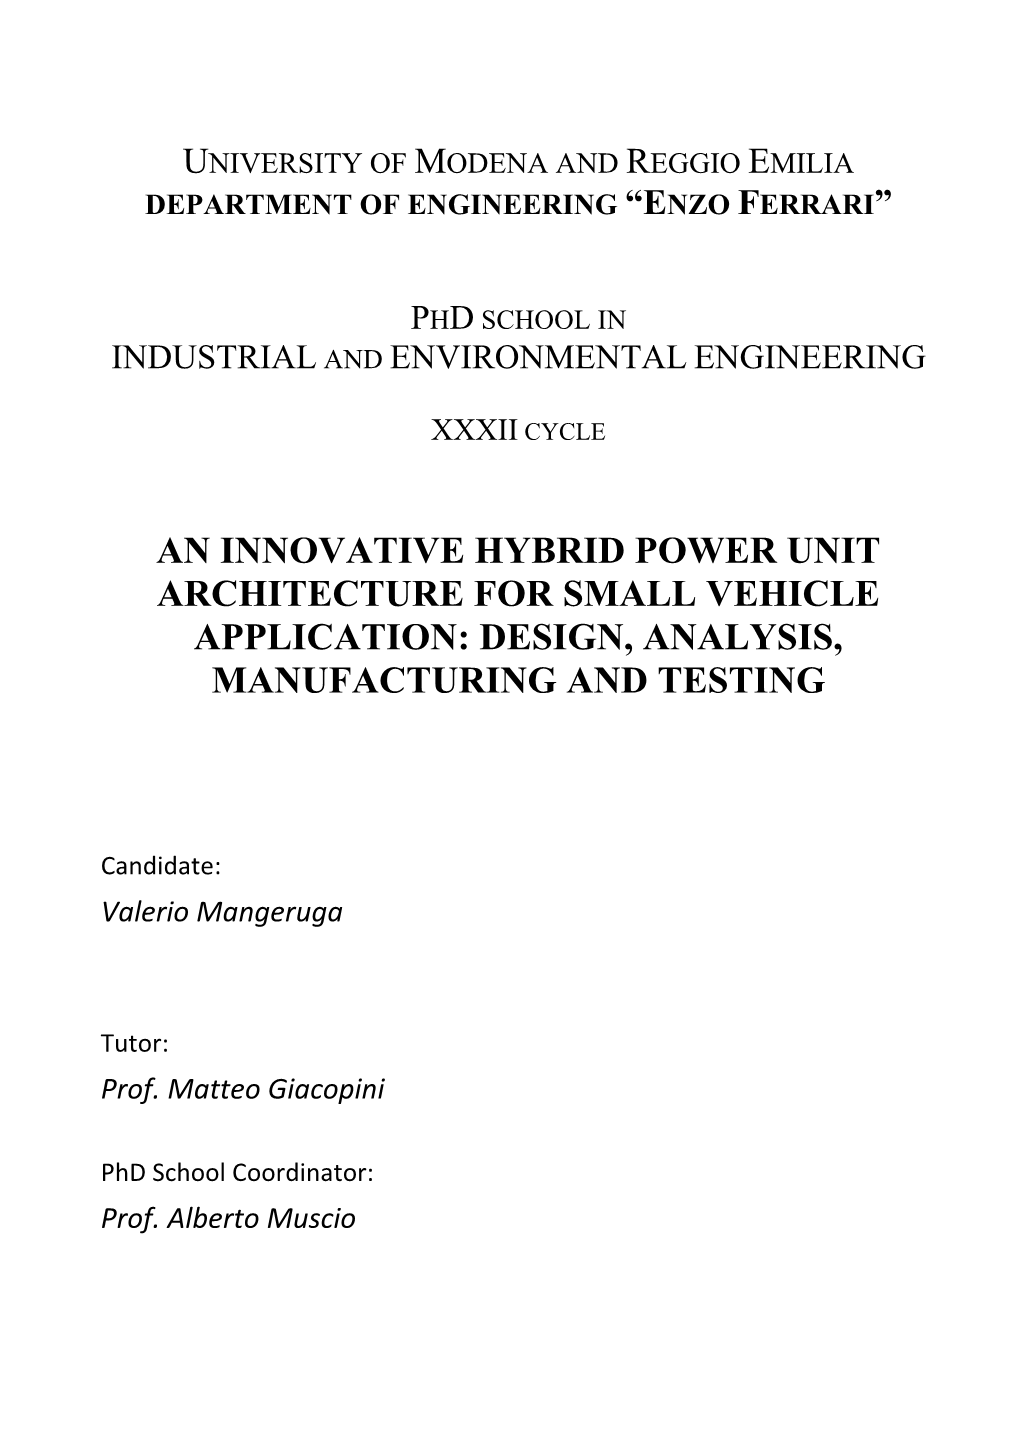 An Innovative Hybrid Power Unit Architecture for Small Vehicle Application: Design, Analysis, Manufacturing and Testing